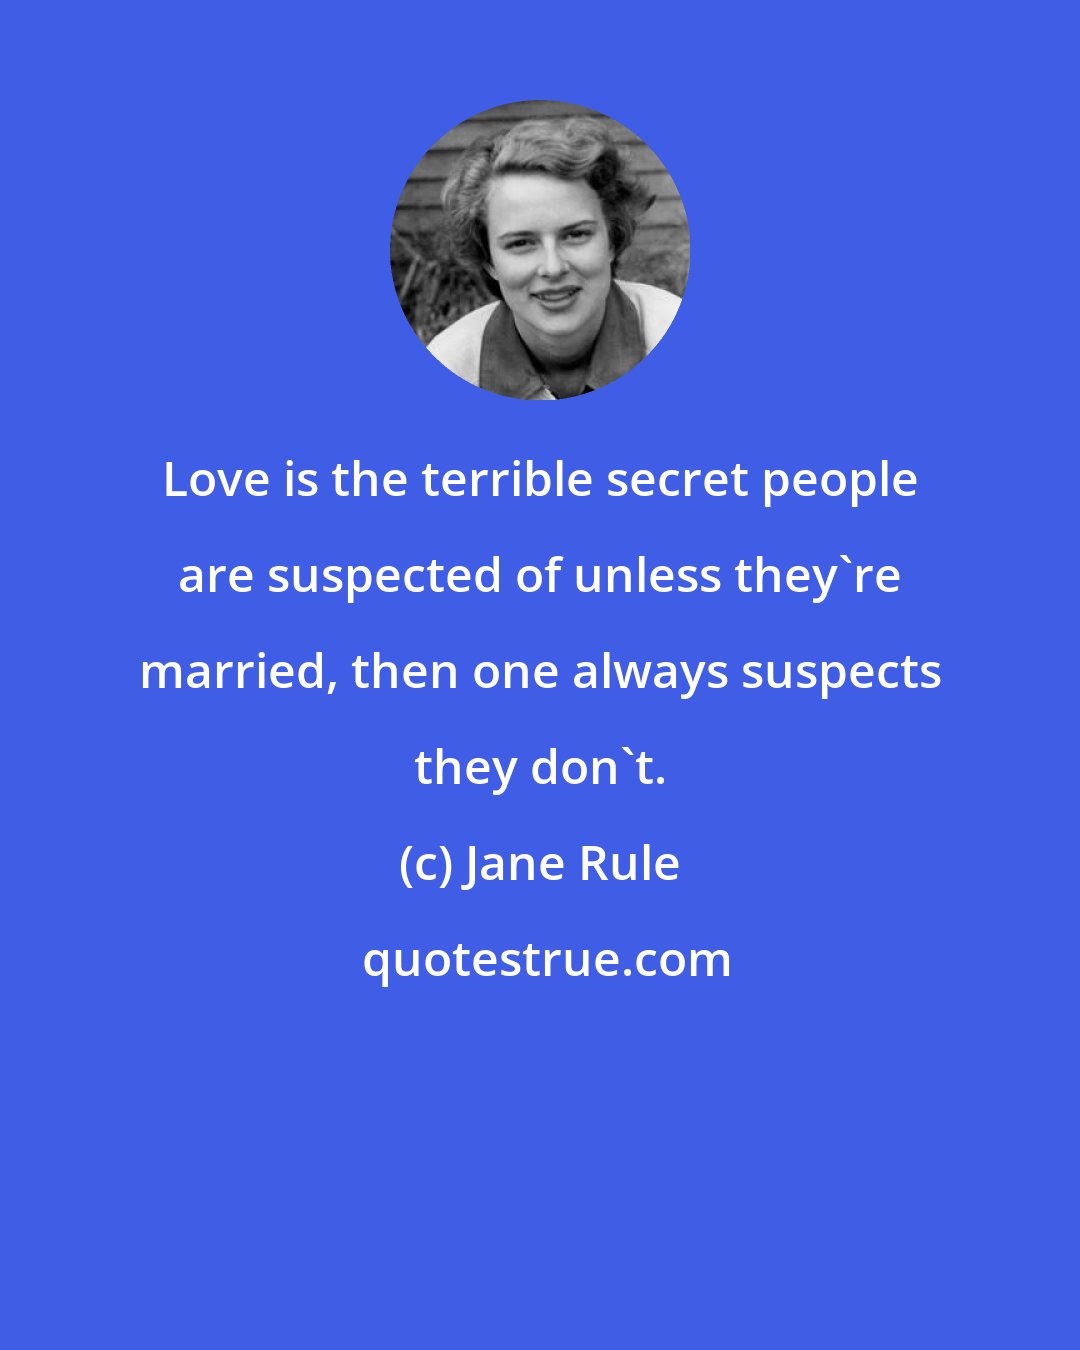 Jane Rule: Love is the terrible secret people are suspected of unless they're married, then one always suspects they don't.